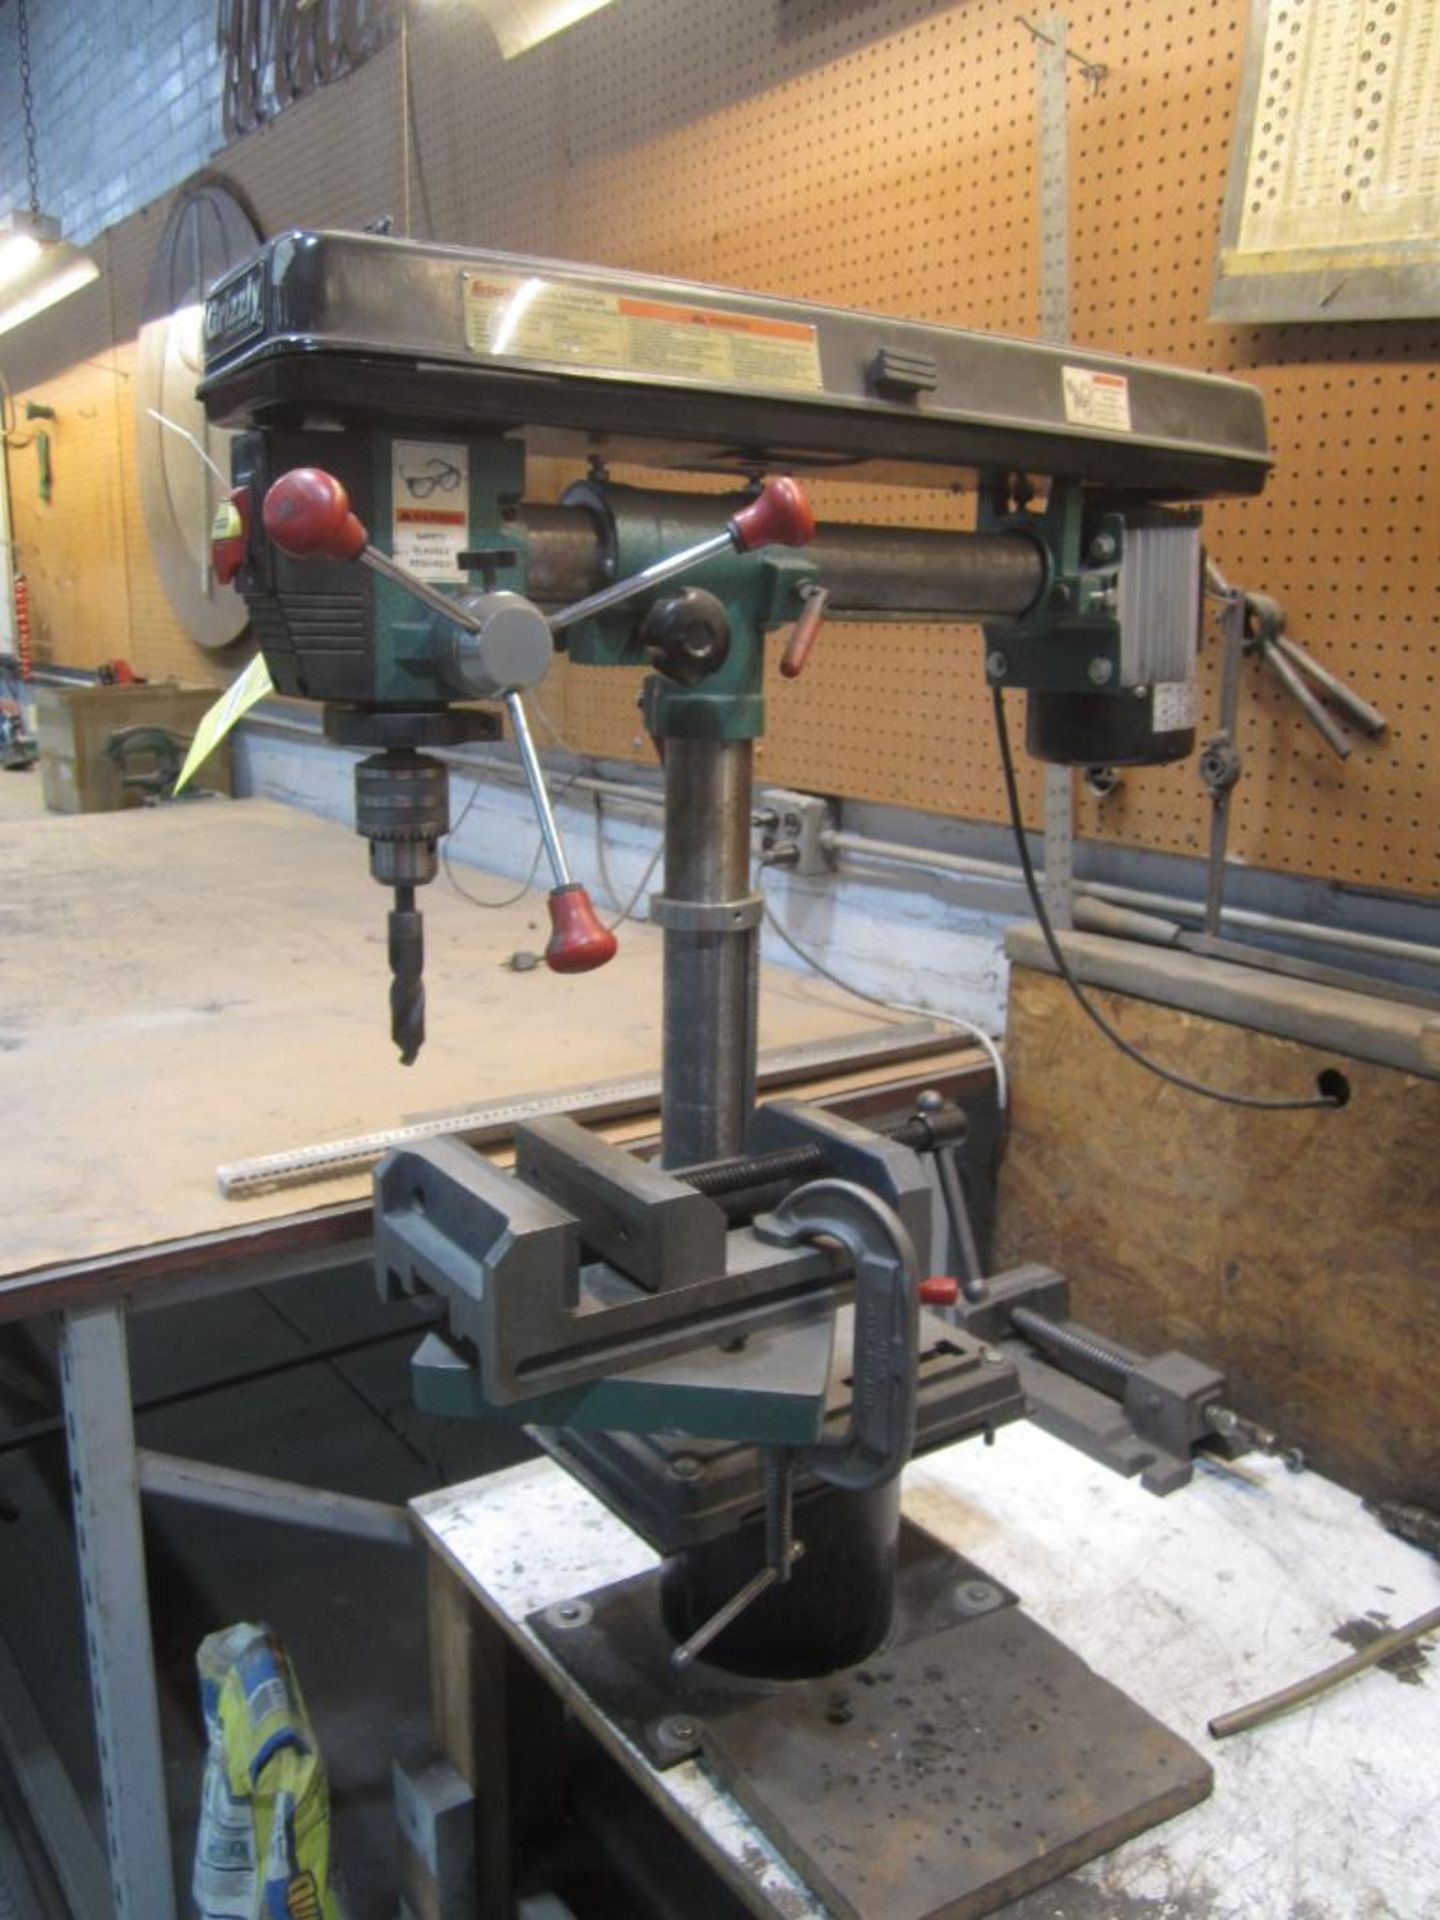 Grizzly work bench radial drill press - Image 2 of 5